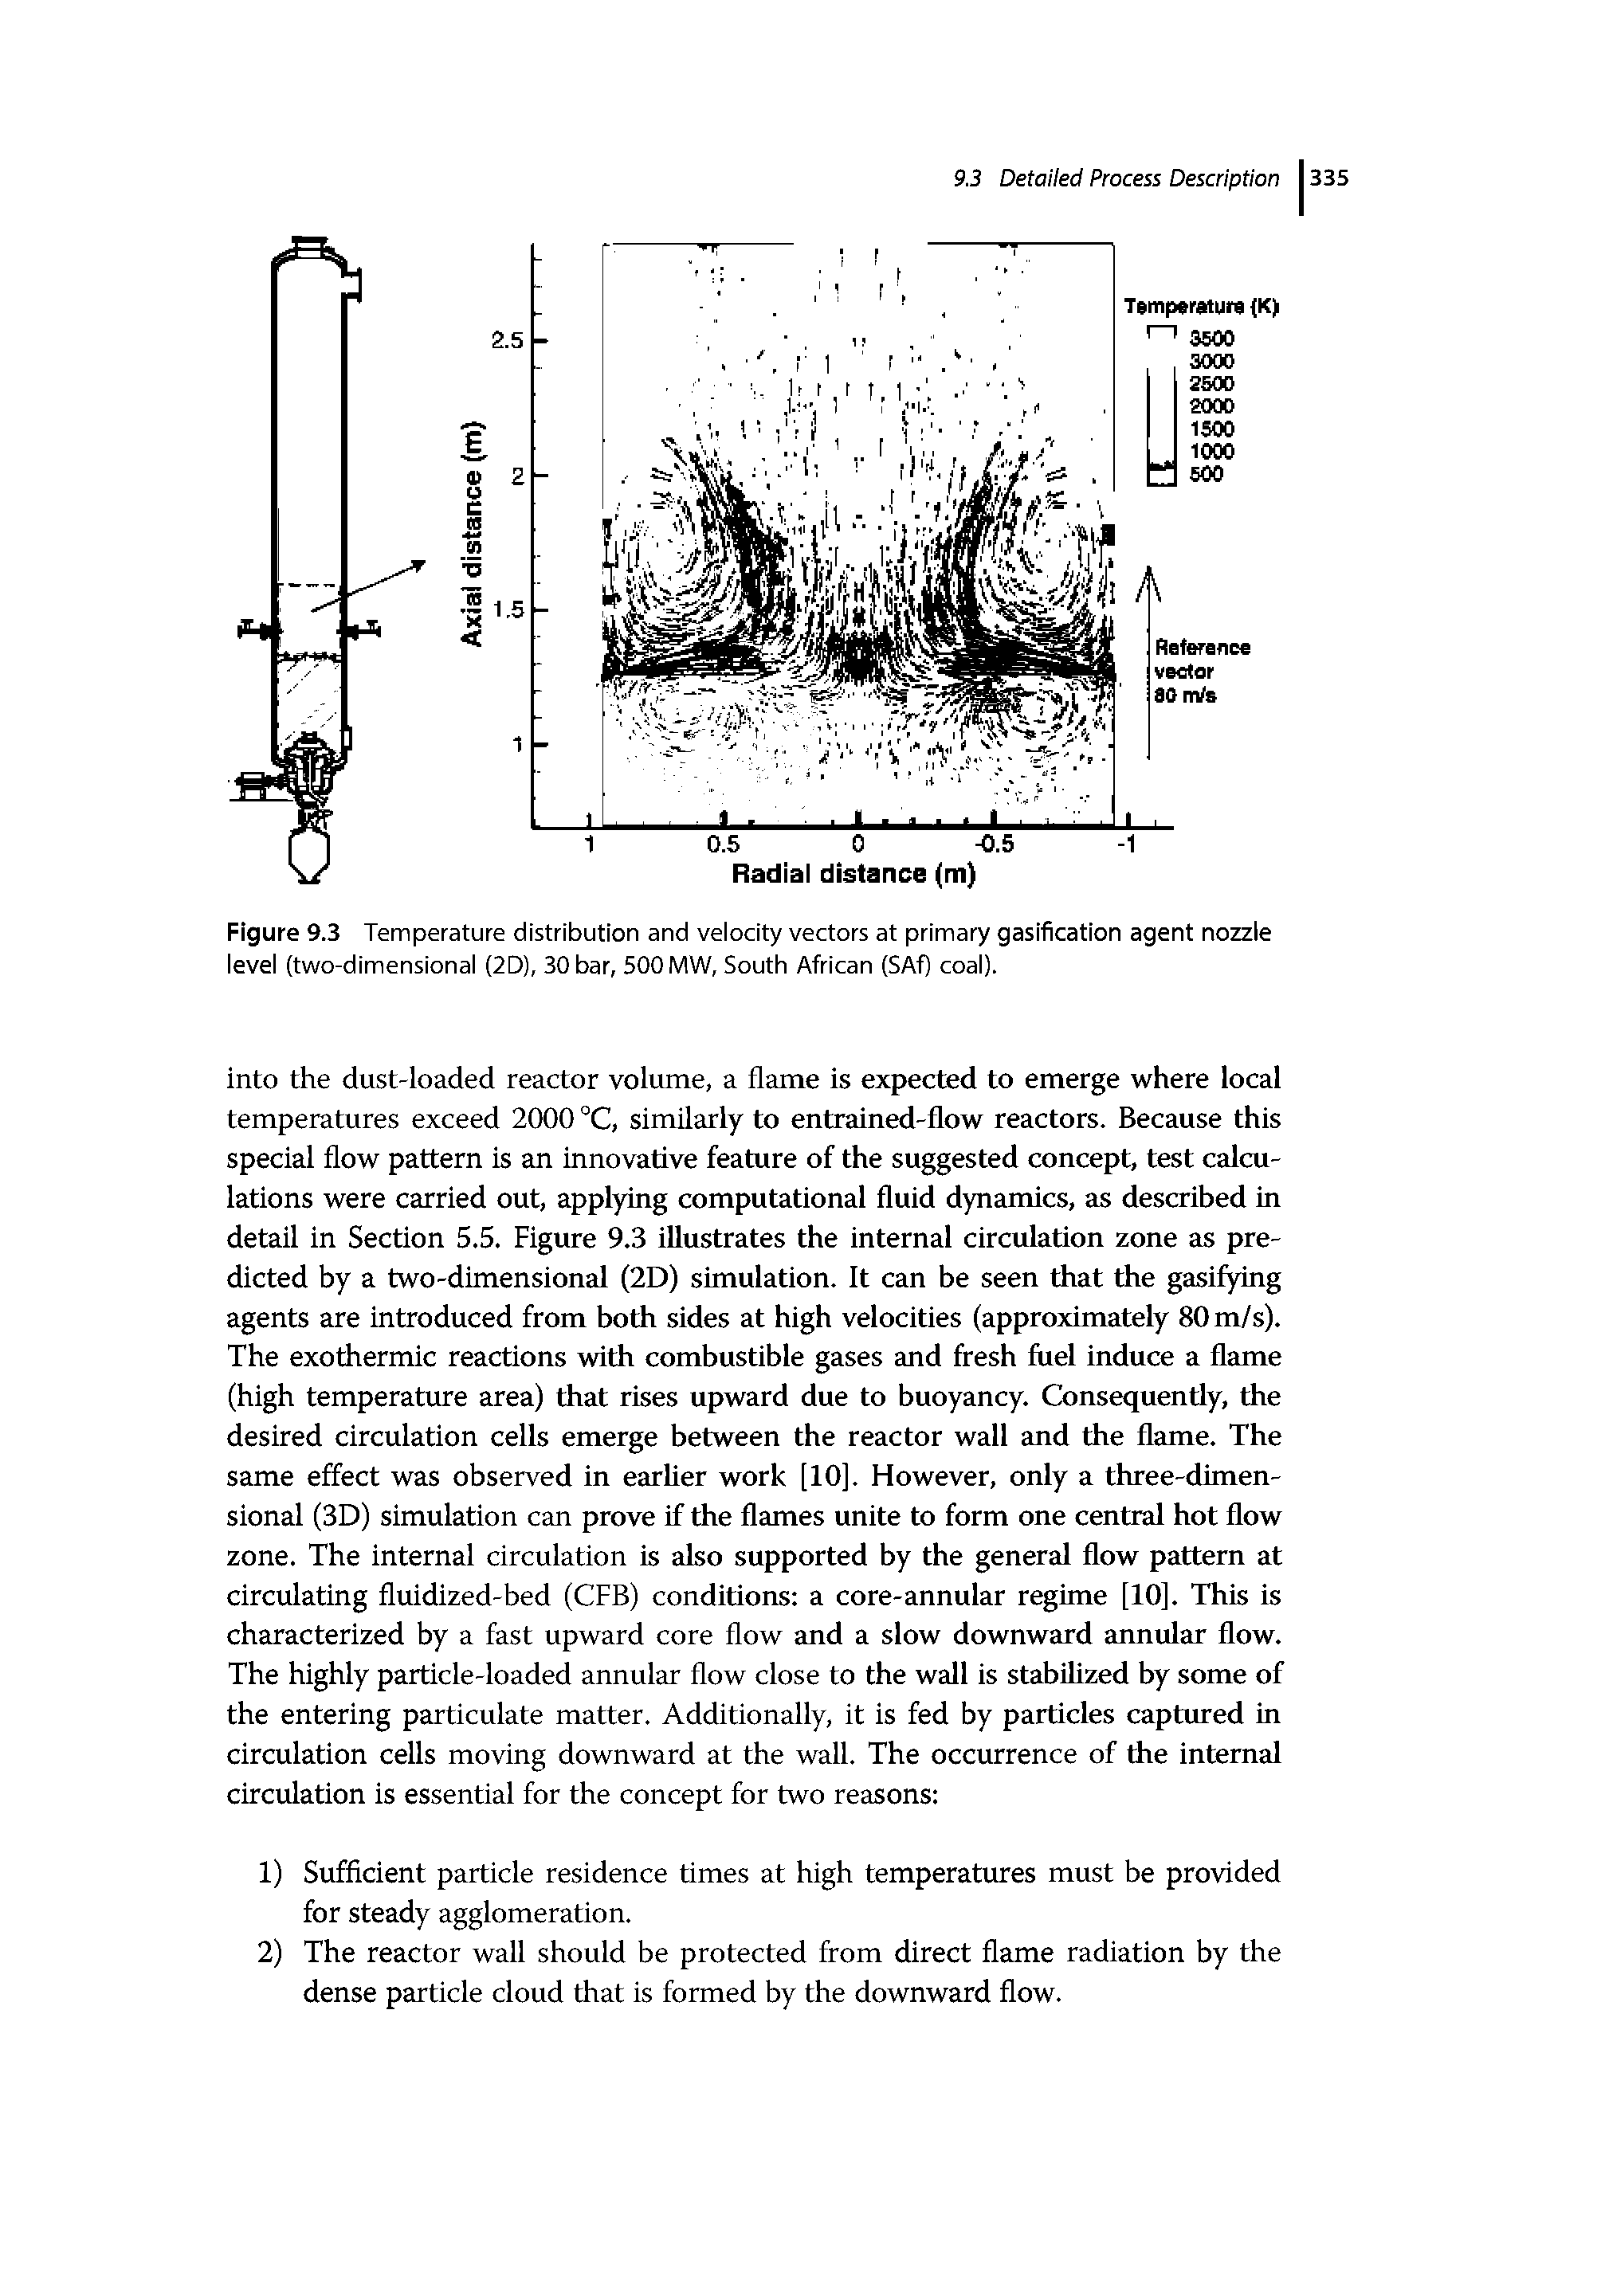 Figure 9.3 Temperature distribution and velocity vectors at primary gasification agent nozzle level (two-dimensional (2D), 30 bar, 500 MW, South African (SAf) coal).